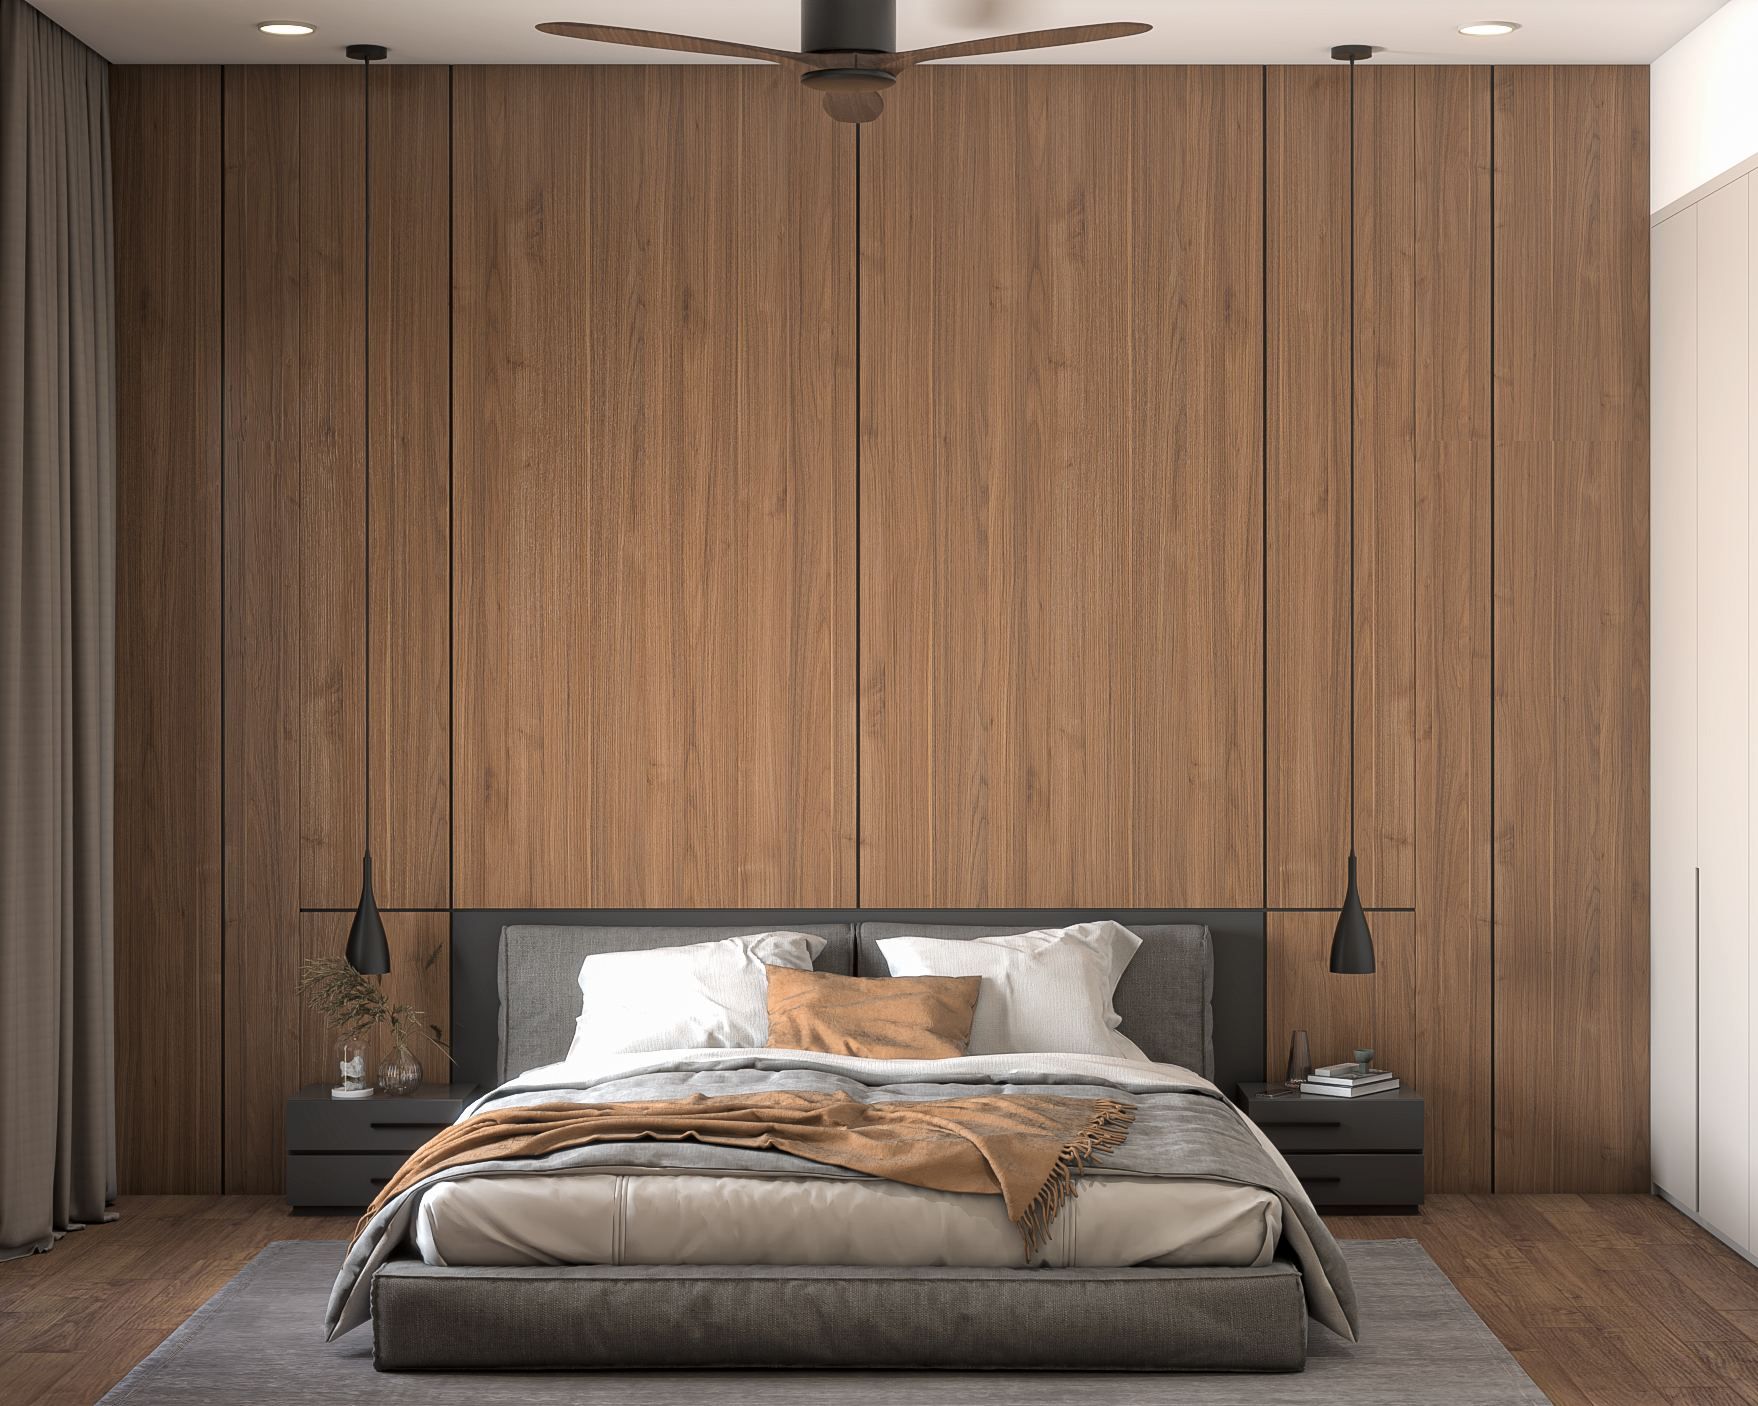 Minimalist Master Bedroom Design With Pendant Lights And Two Nightstands